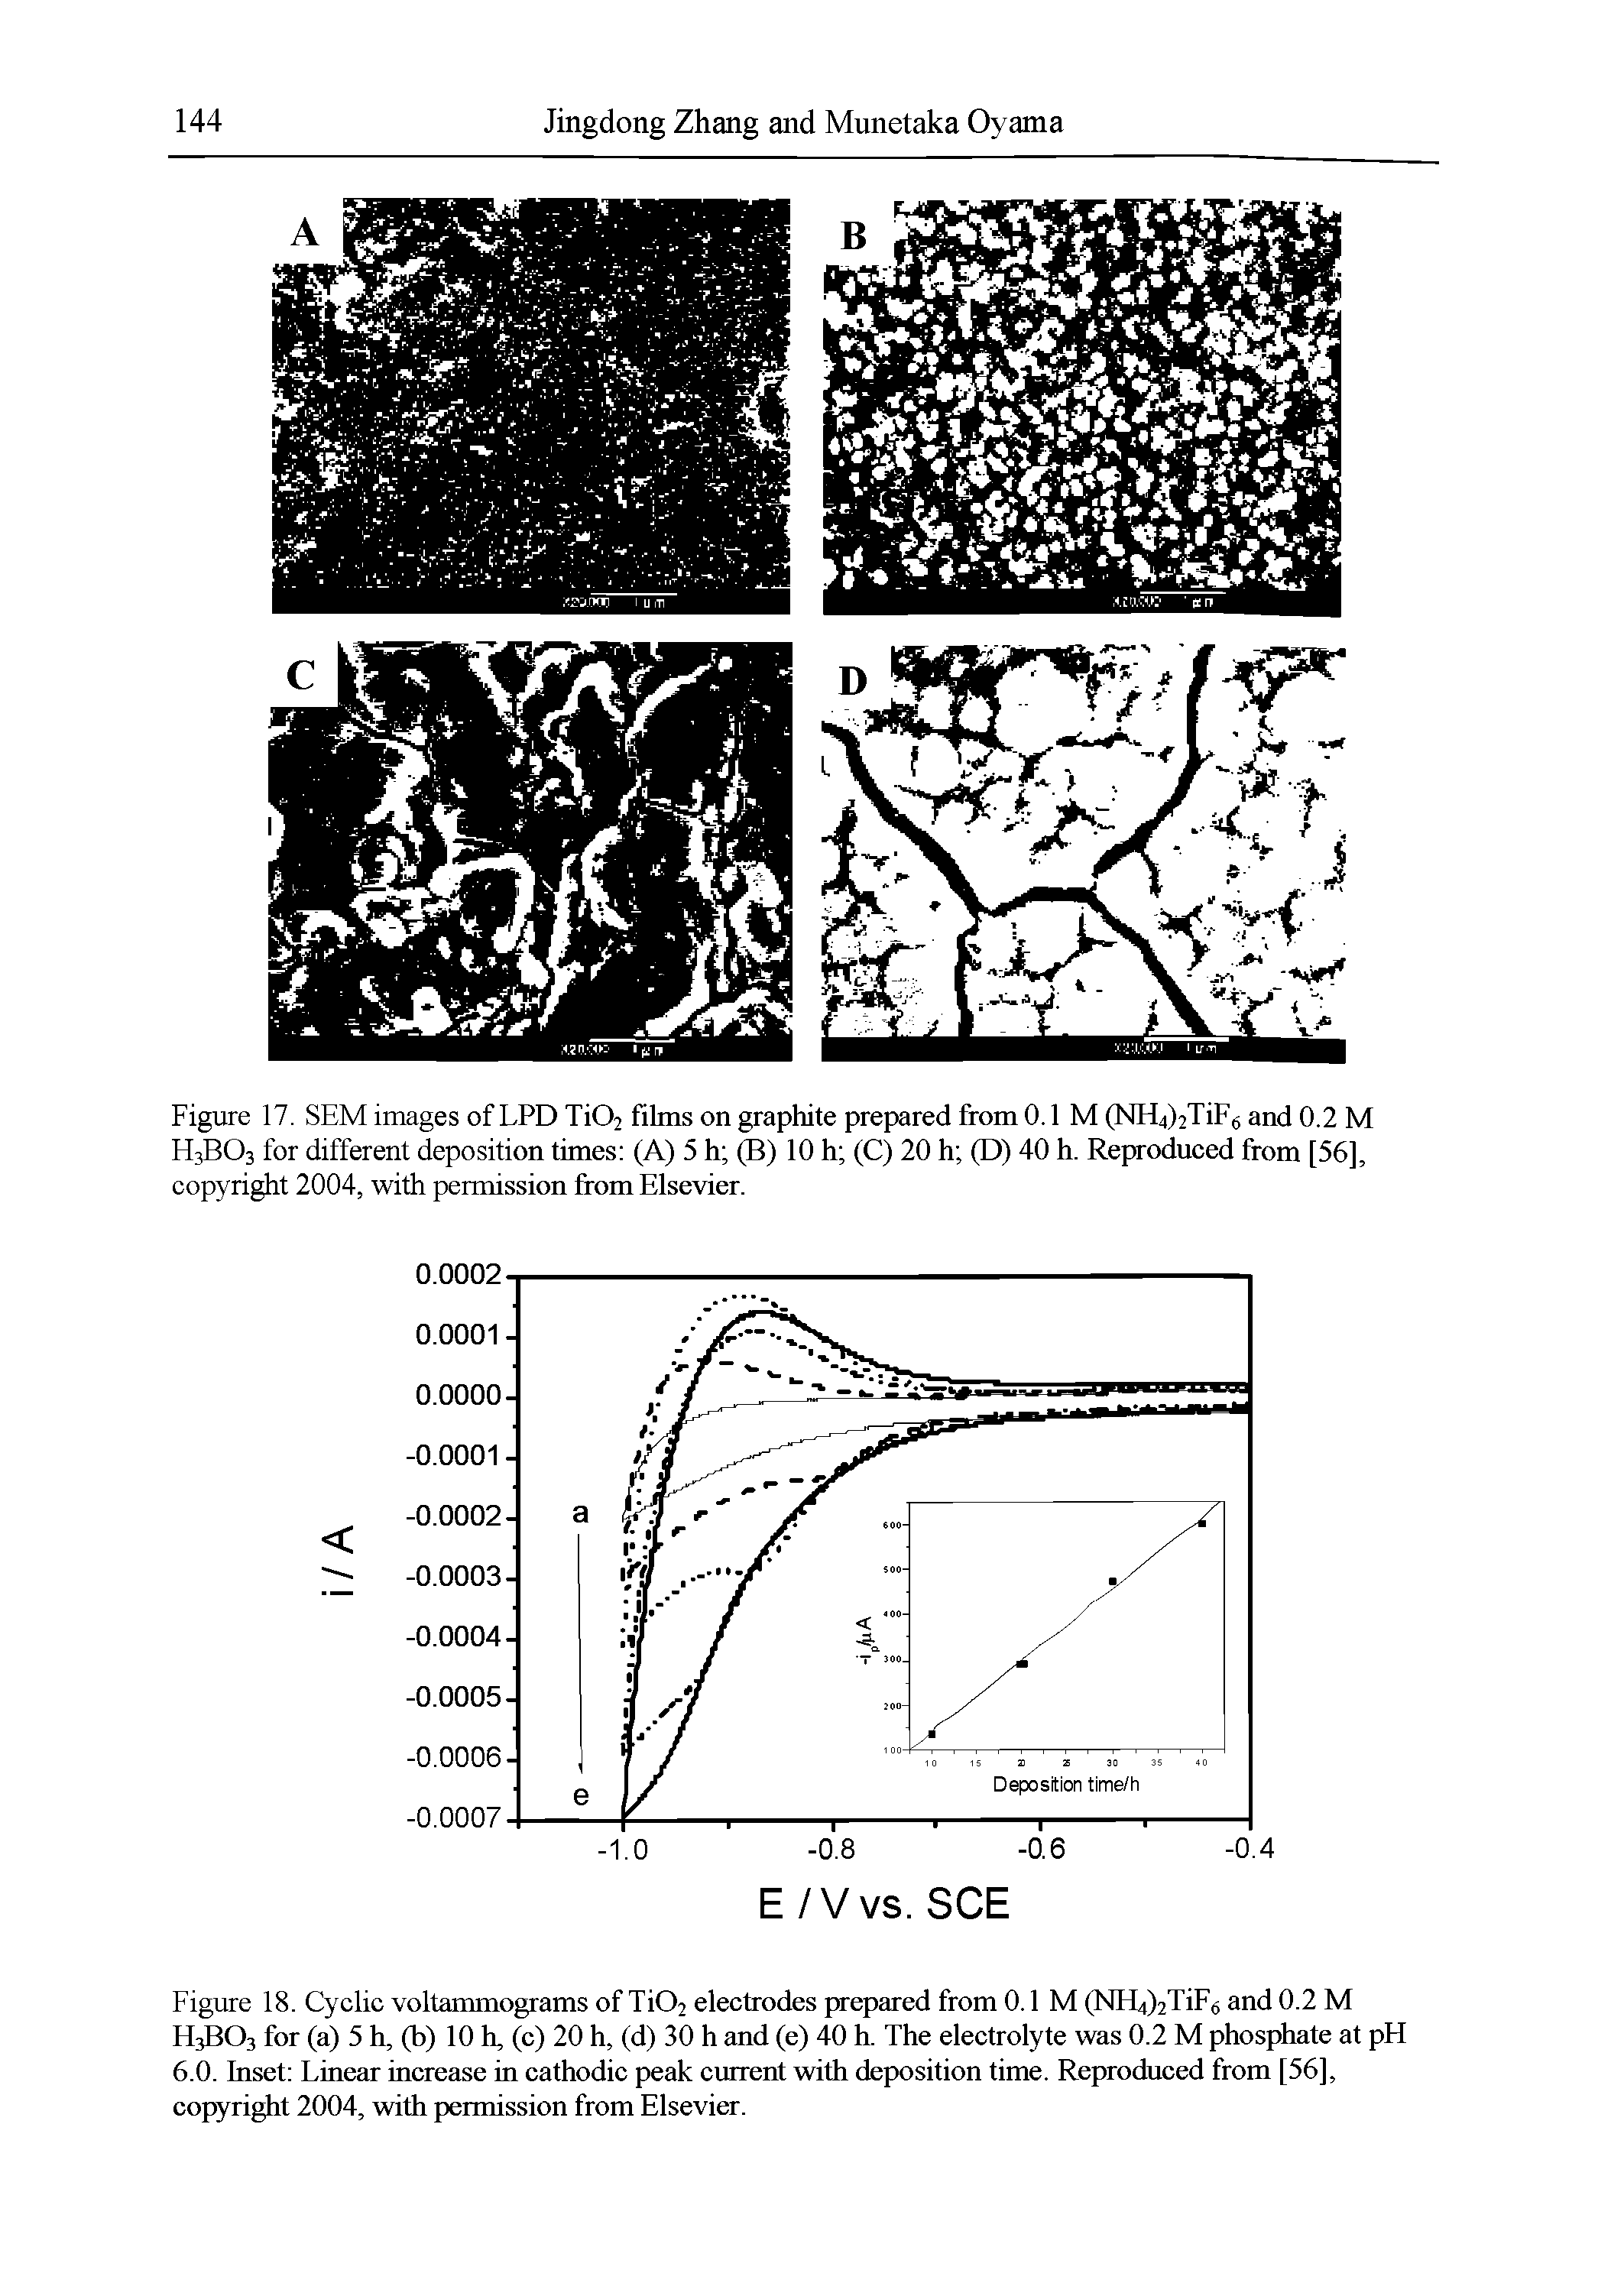 Figure 17. SEM images of LPD Ti02 films on graphite prepared from 0.1 M (NH4)2TiF6 and 0.2 M H3BO3 for different deposition times (A) 5 h (B) 10 h (C) 20 h (D) 40 h. Reproduced from [56], copyright 2004, with permission from Elsevier.